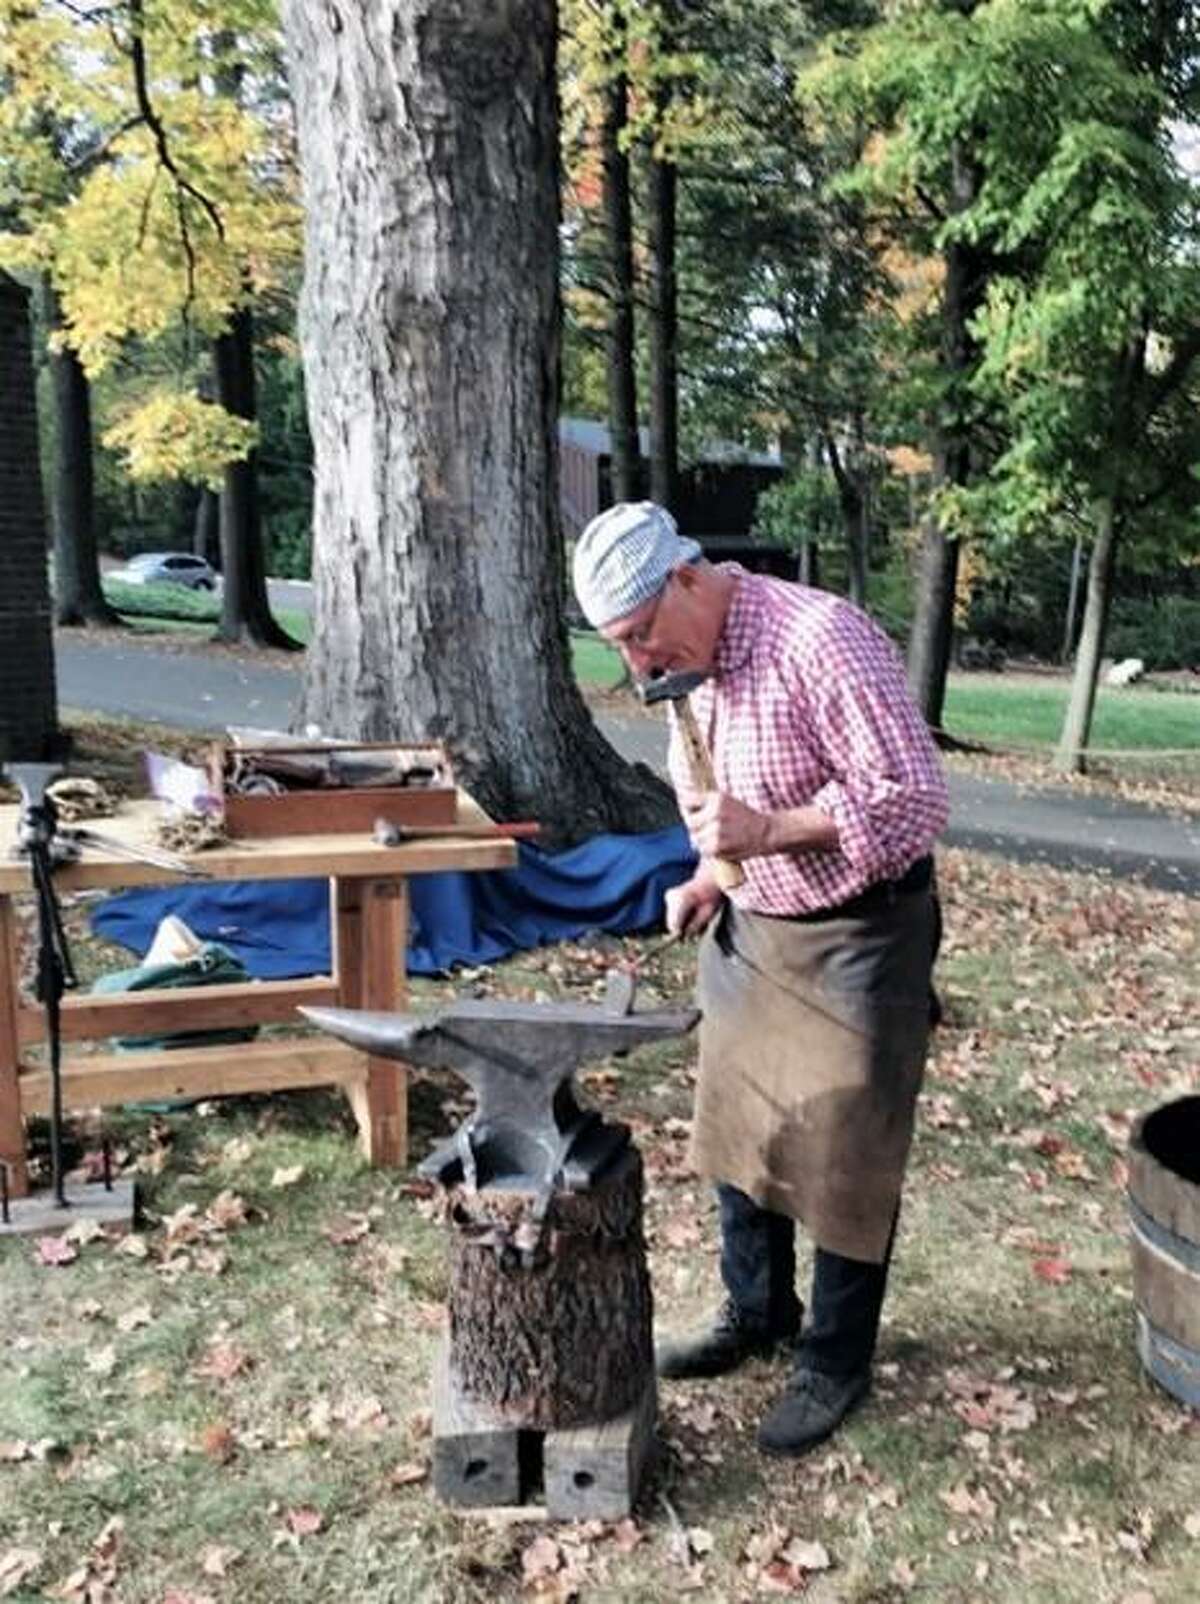 Ralph Lapidus depicts 18th-century blacksmithing in an outdoor family demonstration of the 2017 "#HandsonHistory: It Takes A Village" exhibition.